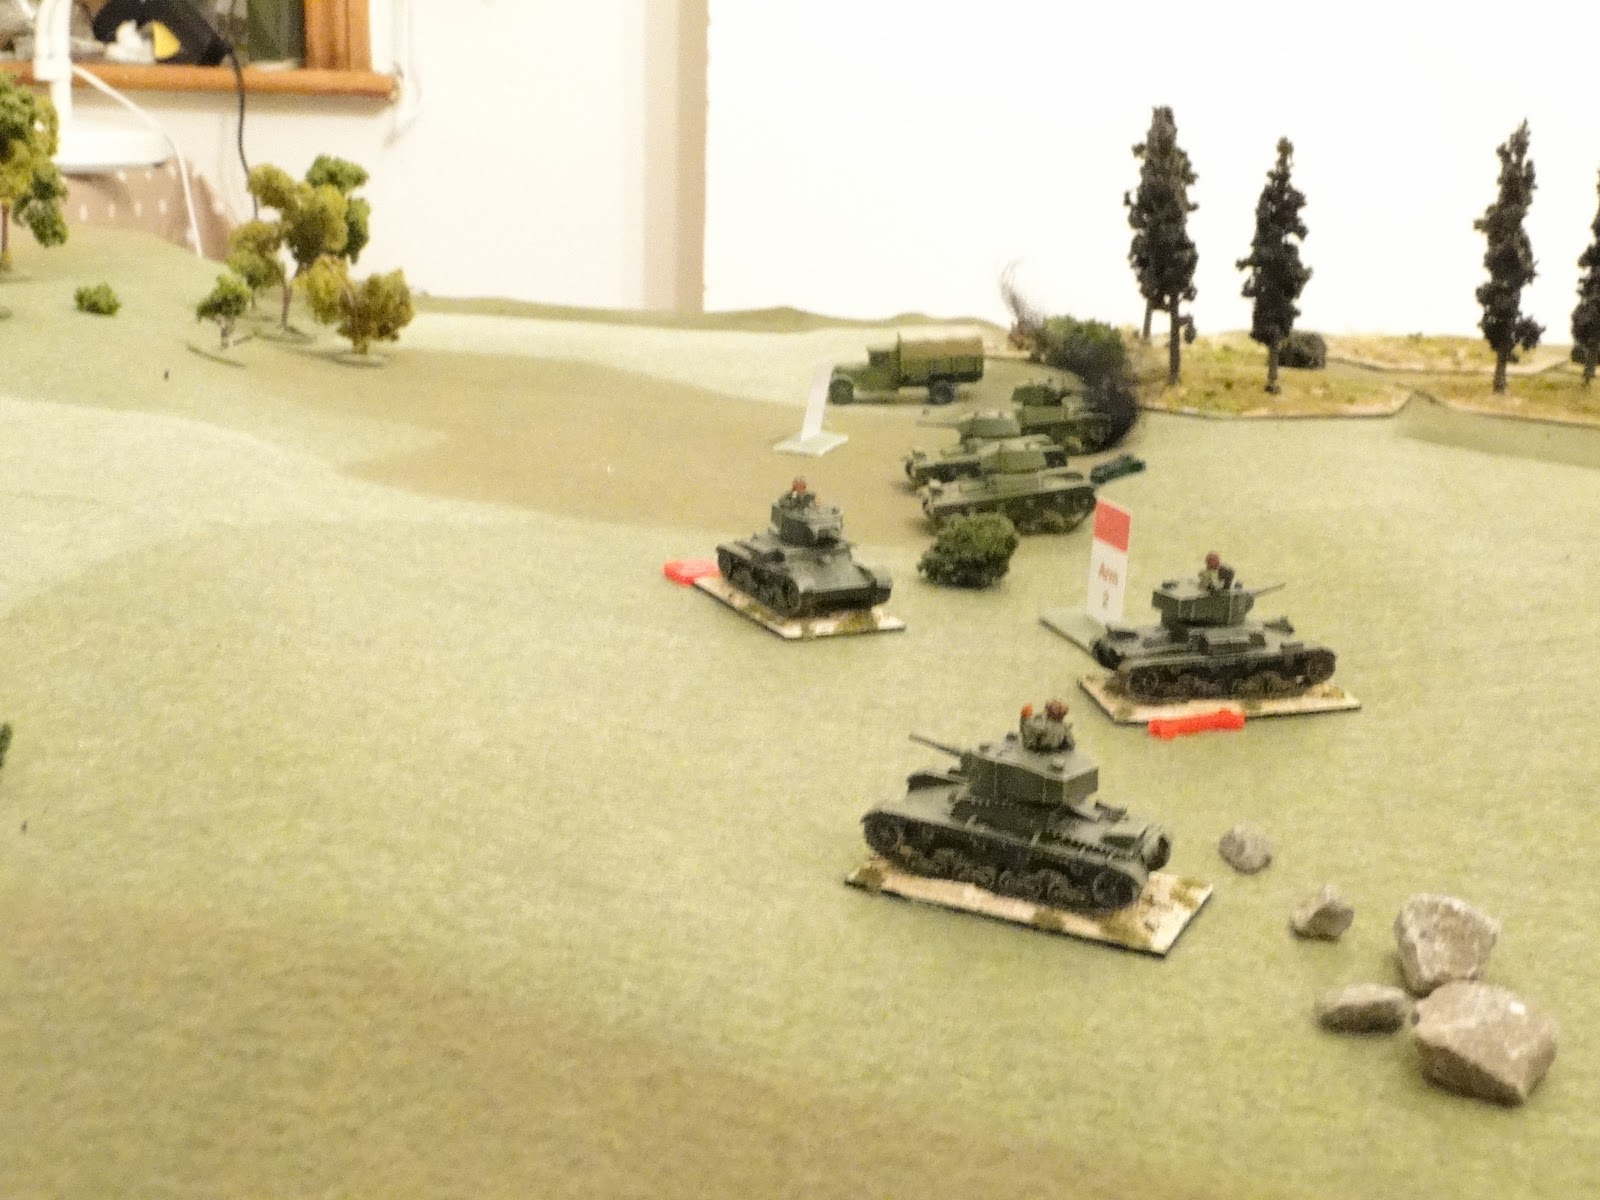 T26s panic with Germans front and rear.